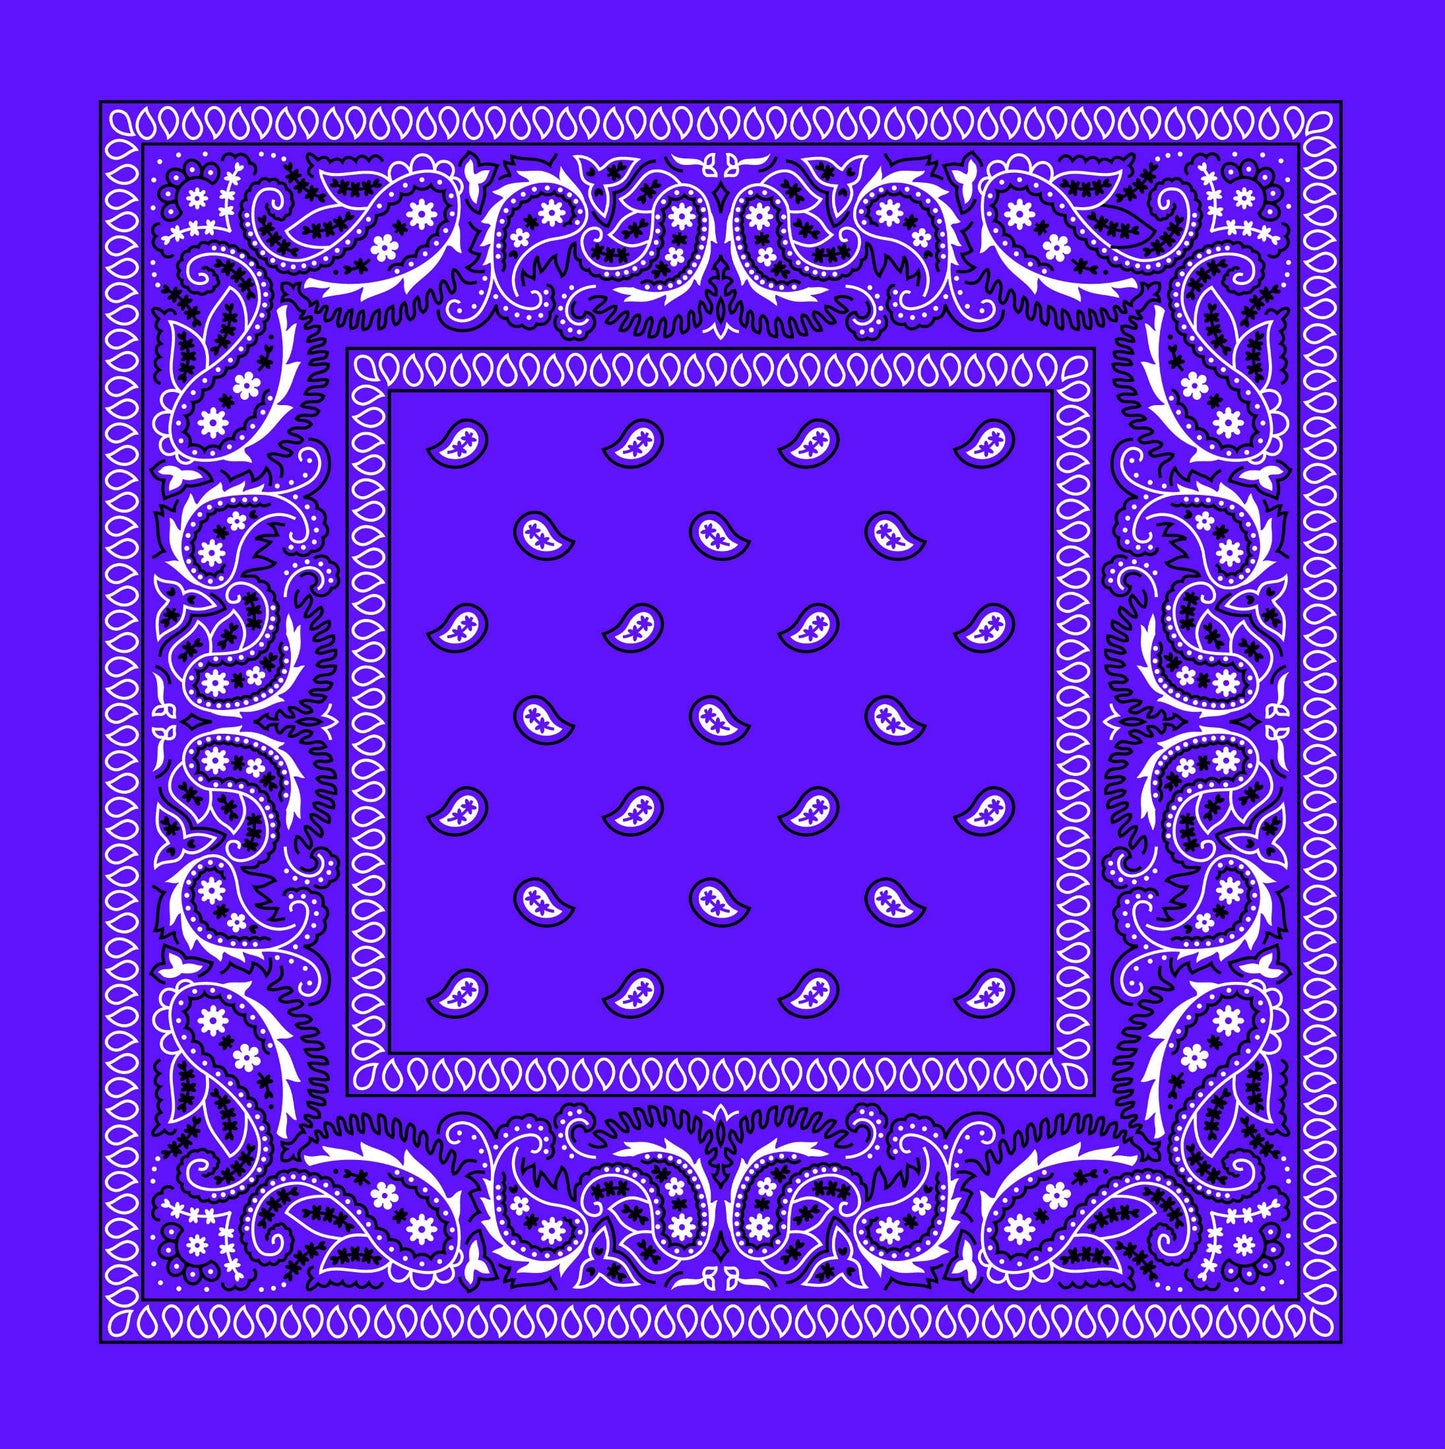 Purple Paisley Bandana, Satin or Poplin with Traditional Pattern for a Head Wrap or Neck Scarf